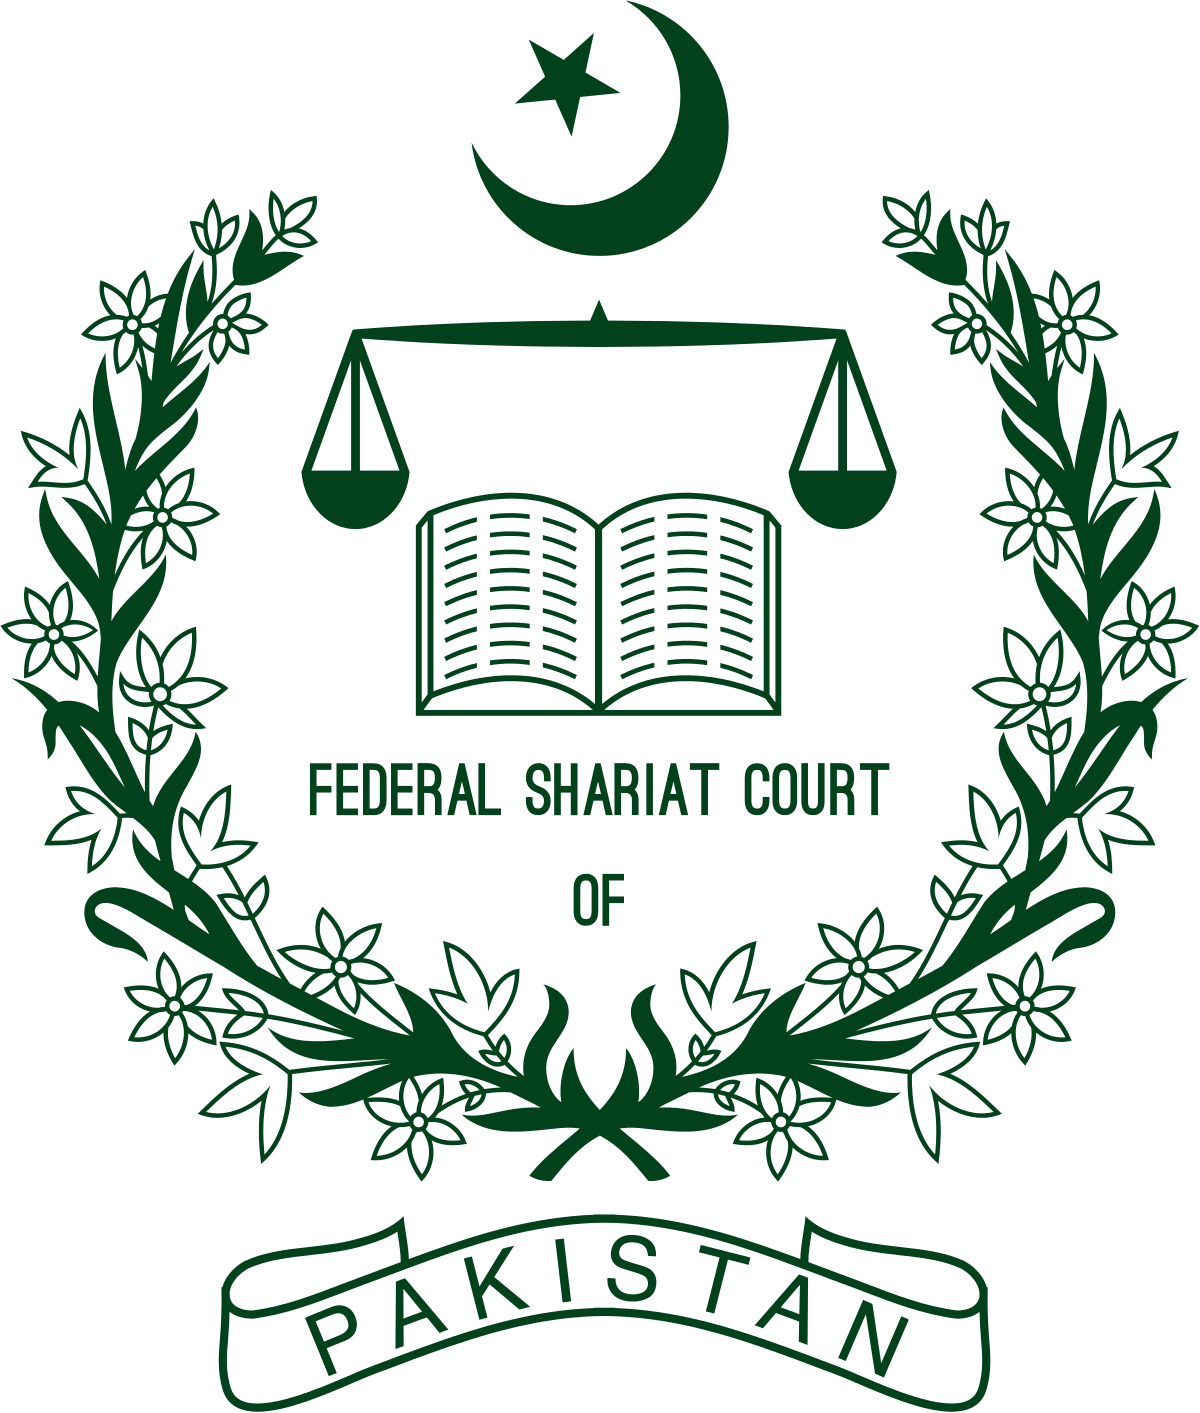 Emblem_of_the_Federal_Shariat_Court_of_Pakistan